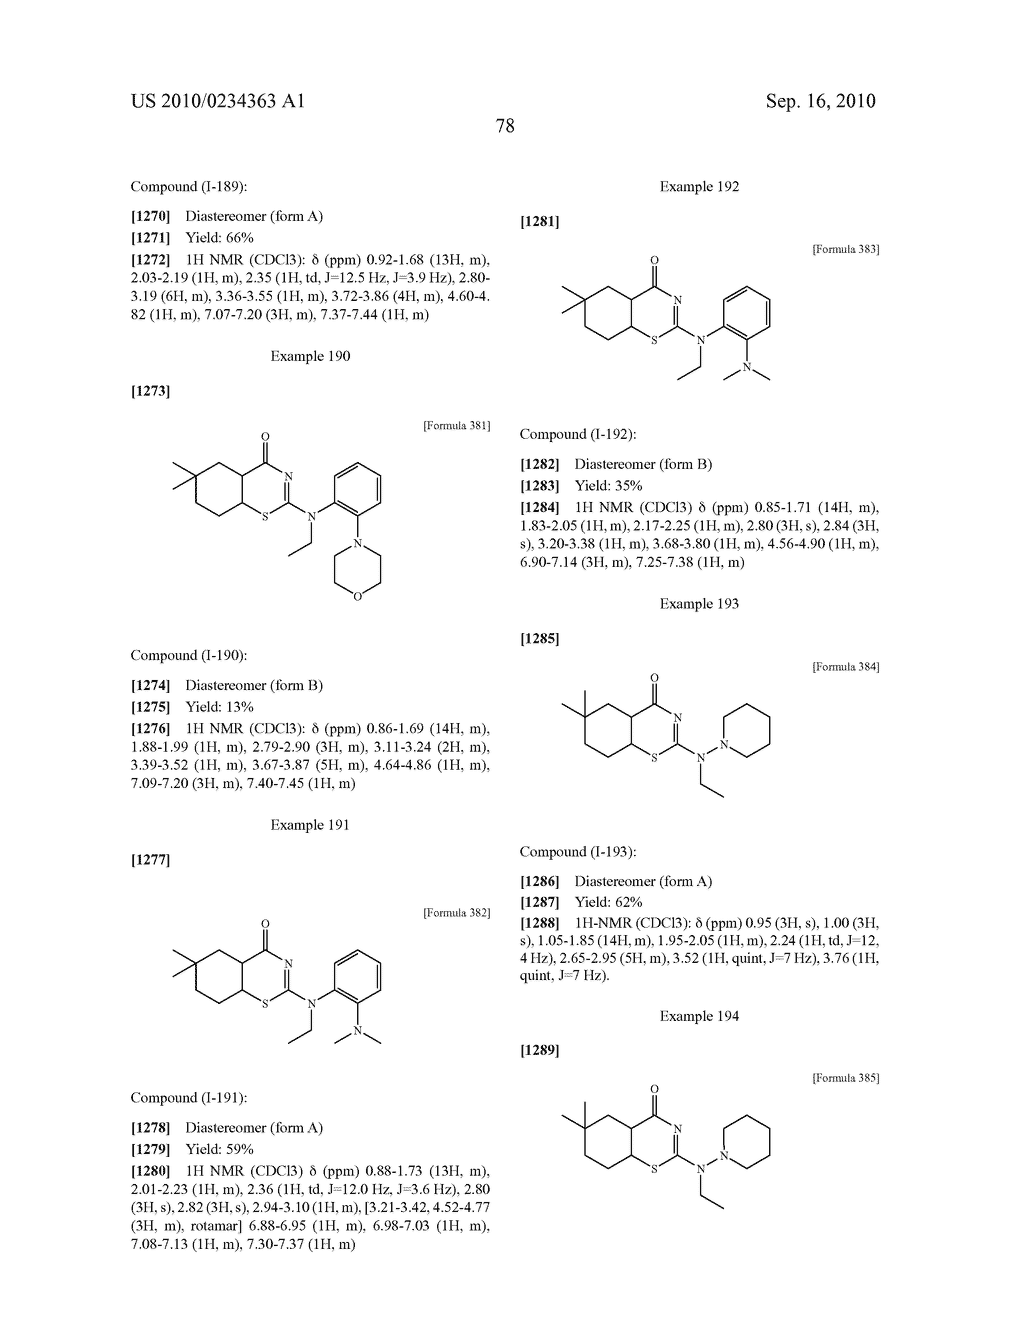 HETEROCYCLIC DERIVATIVE HAVING INHIBITORY ACTIVITY ON TYPE-I 11 DATA-HYDROXYSTEROID DEHYDROGENASE - diagram, schematic, and image 79